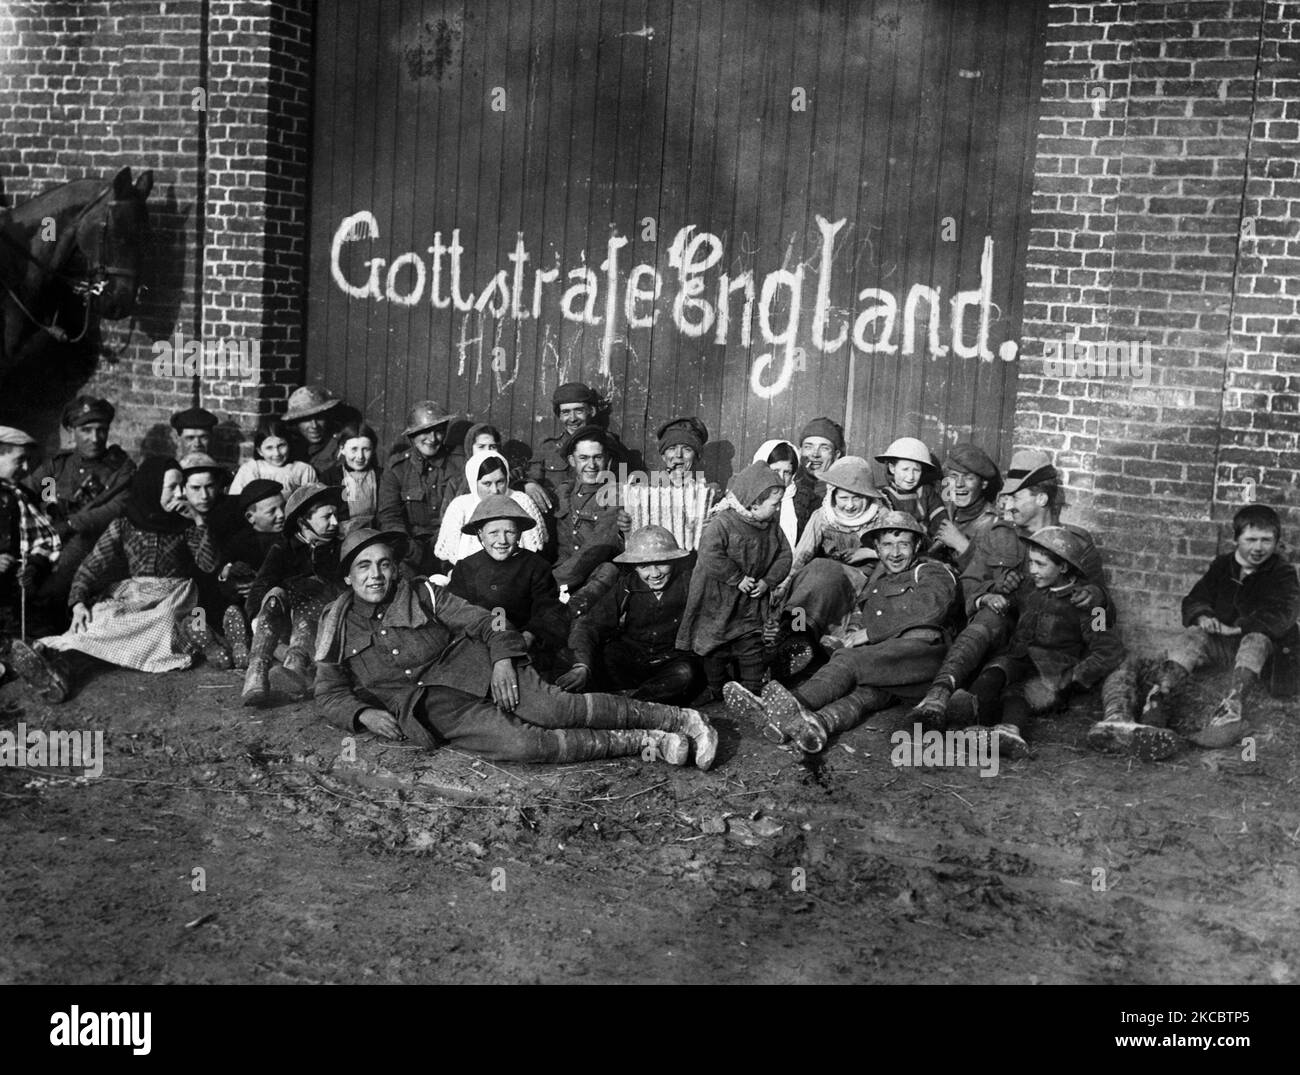 British soldiers, women and children outside a building bearing German graffiti during World War I. Stock Photo